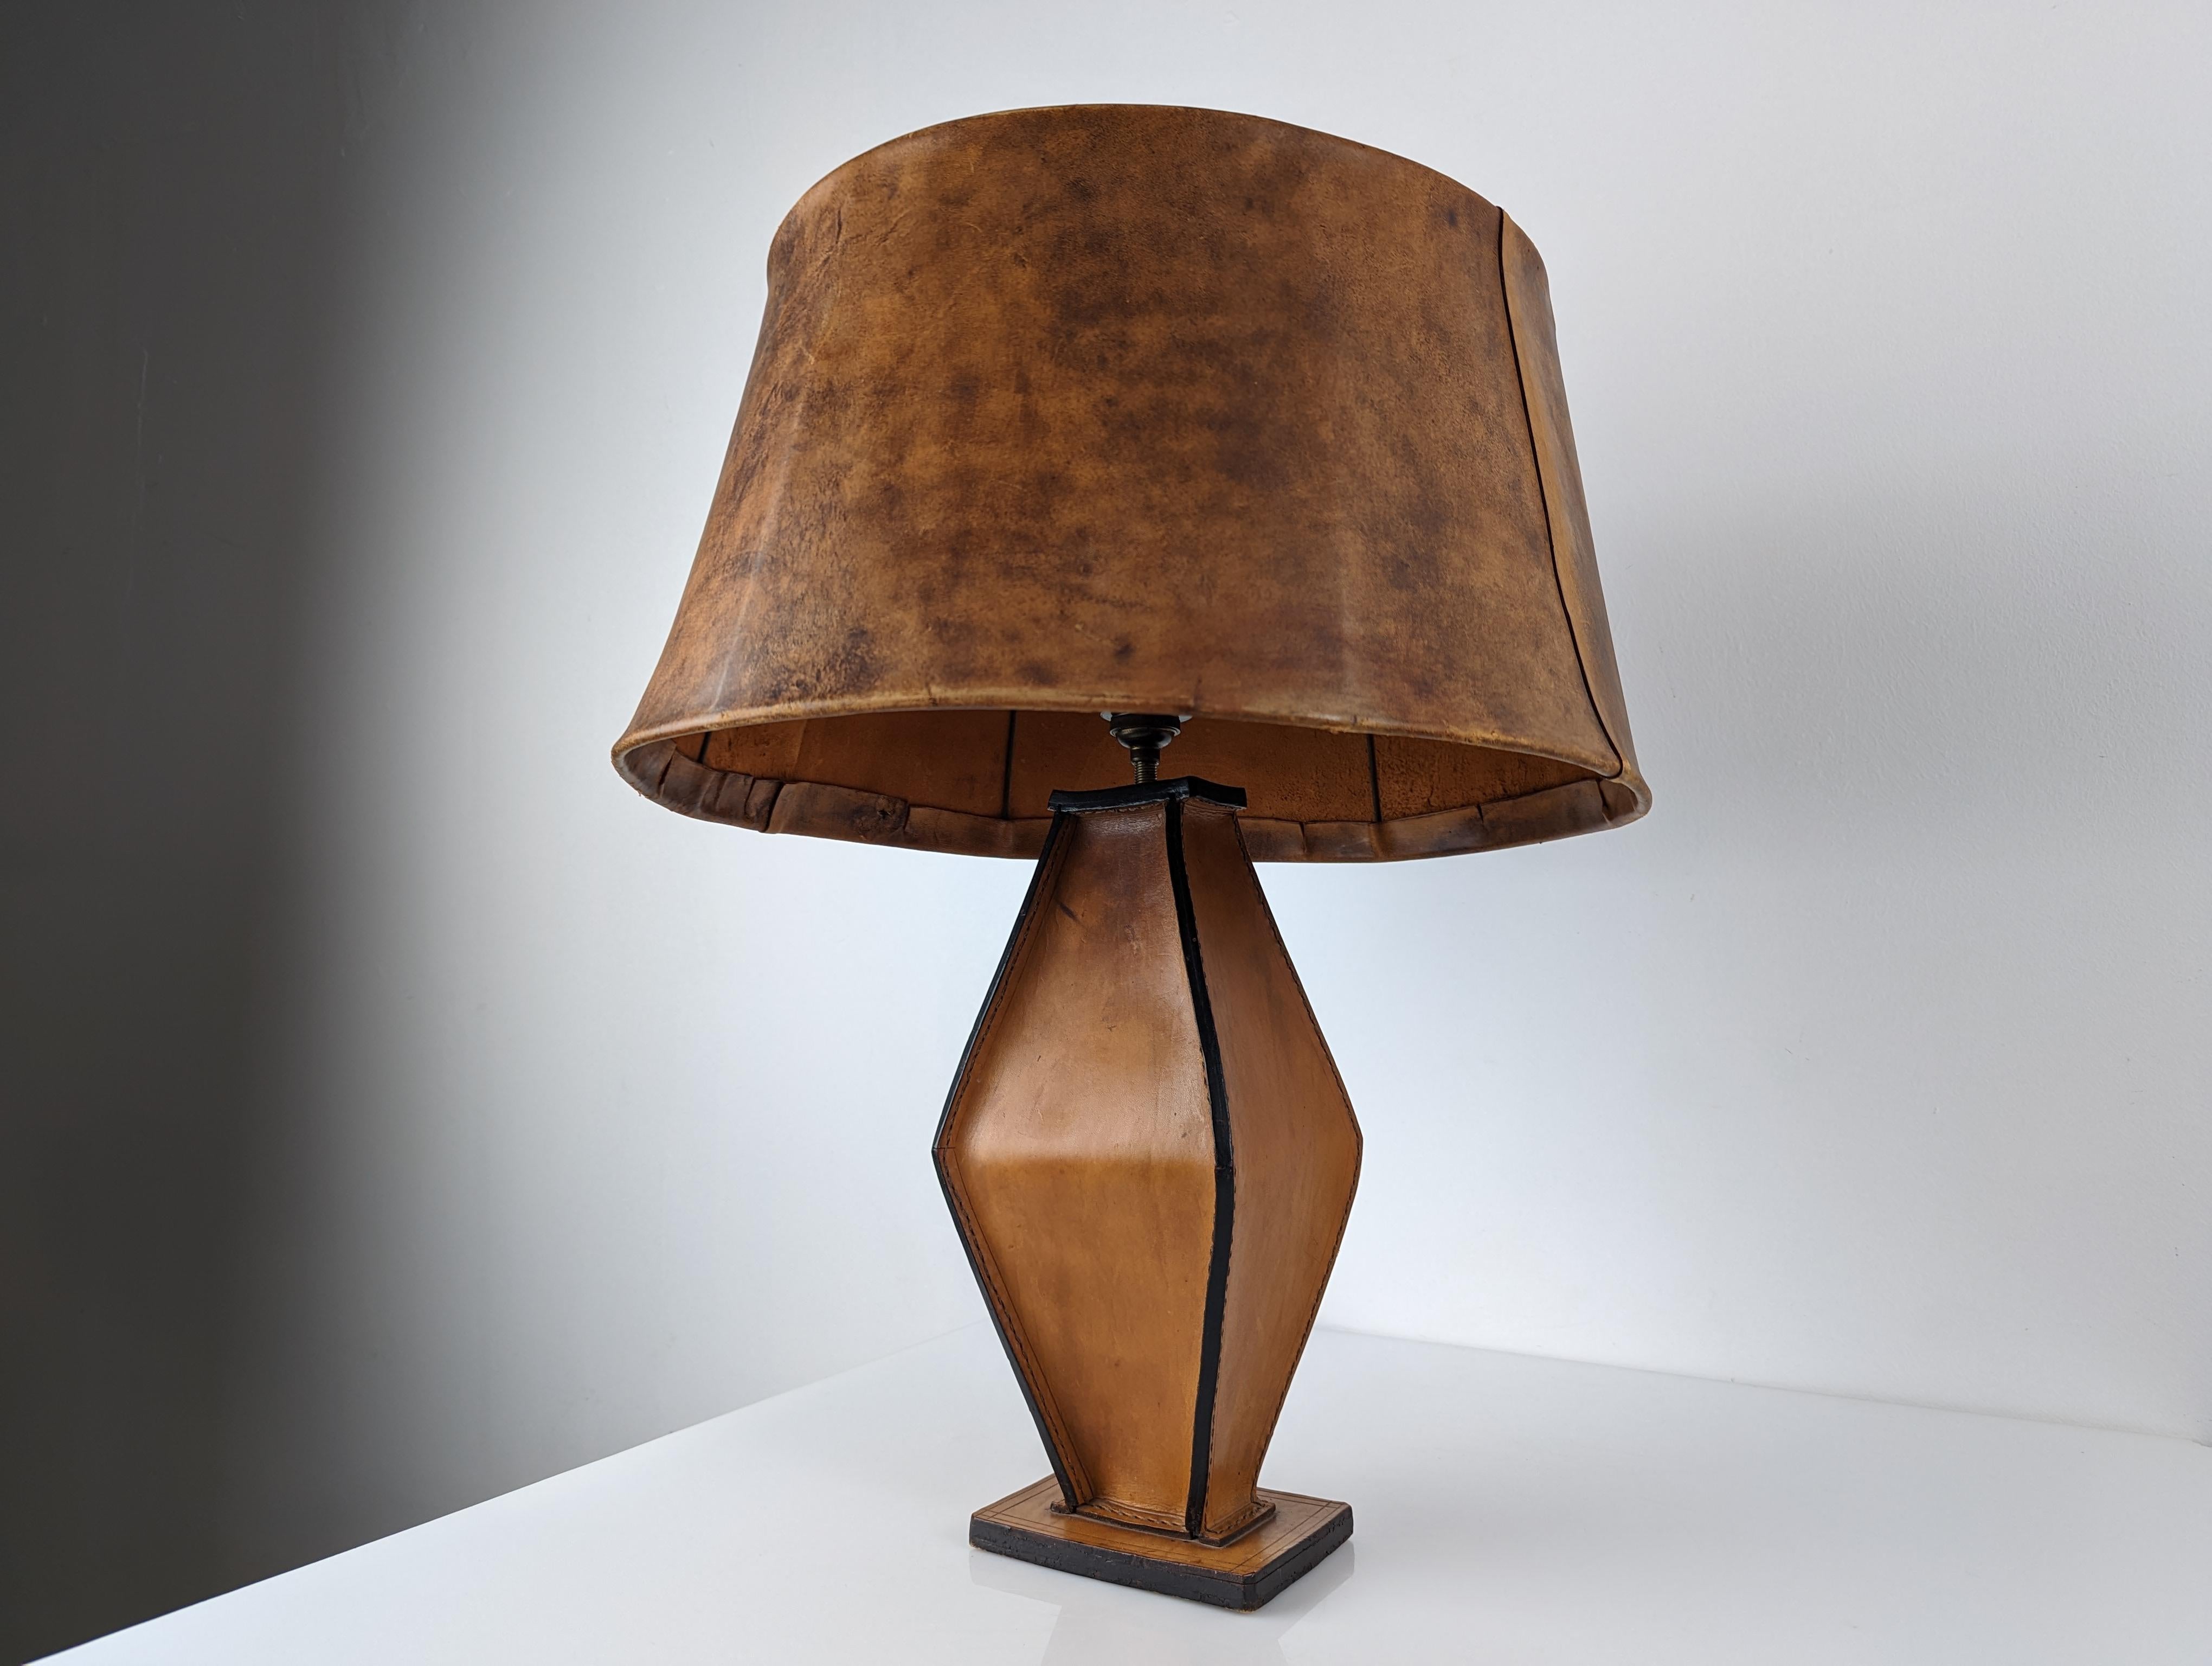 Fantastic lamp made entirely of sewn leather including the original lampshade, a wonderful piece from the 1940s in what may be a unique model by the great French designer and architect Jacques Adnet.

Total dimensions: 50 cm high x 46 cm wide

Lamp